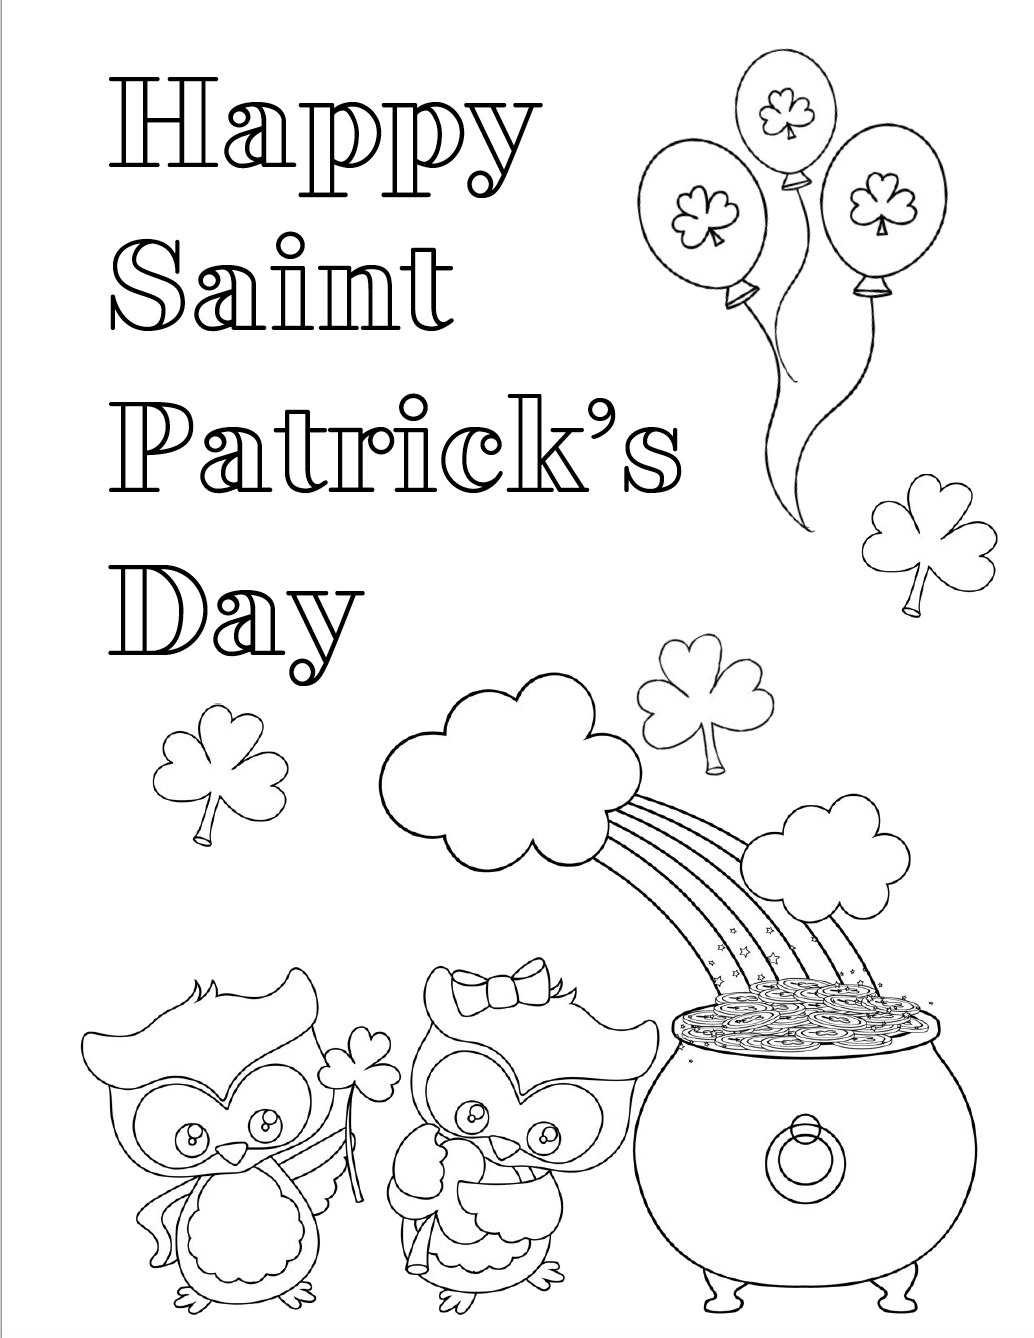 Free Printable St. Patrick’s Day Coloring Pages: 4 Designs!